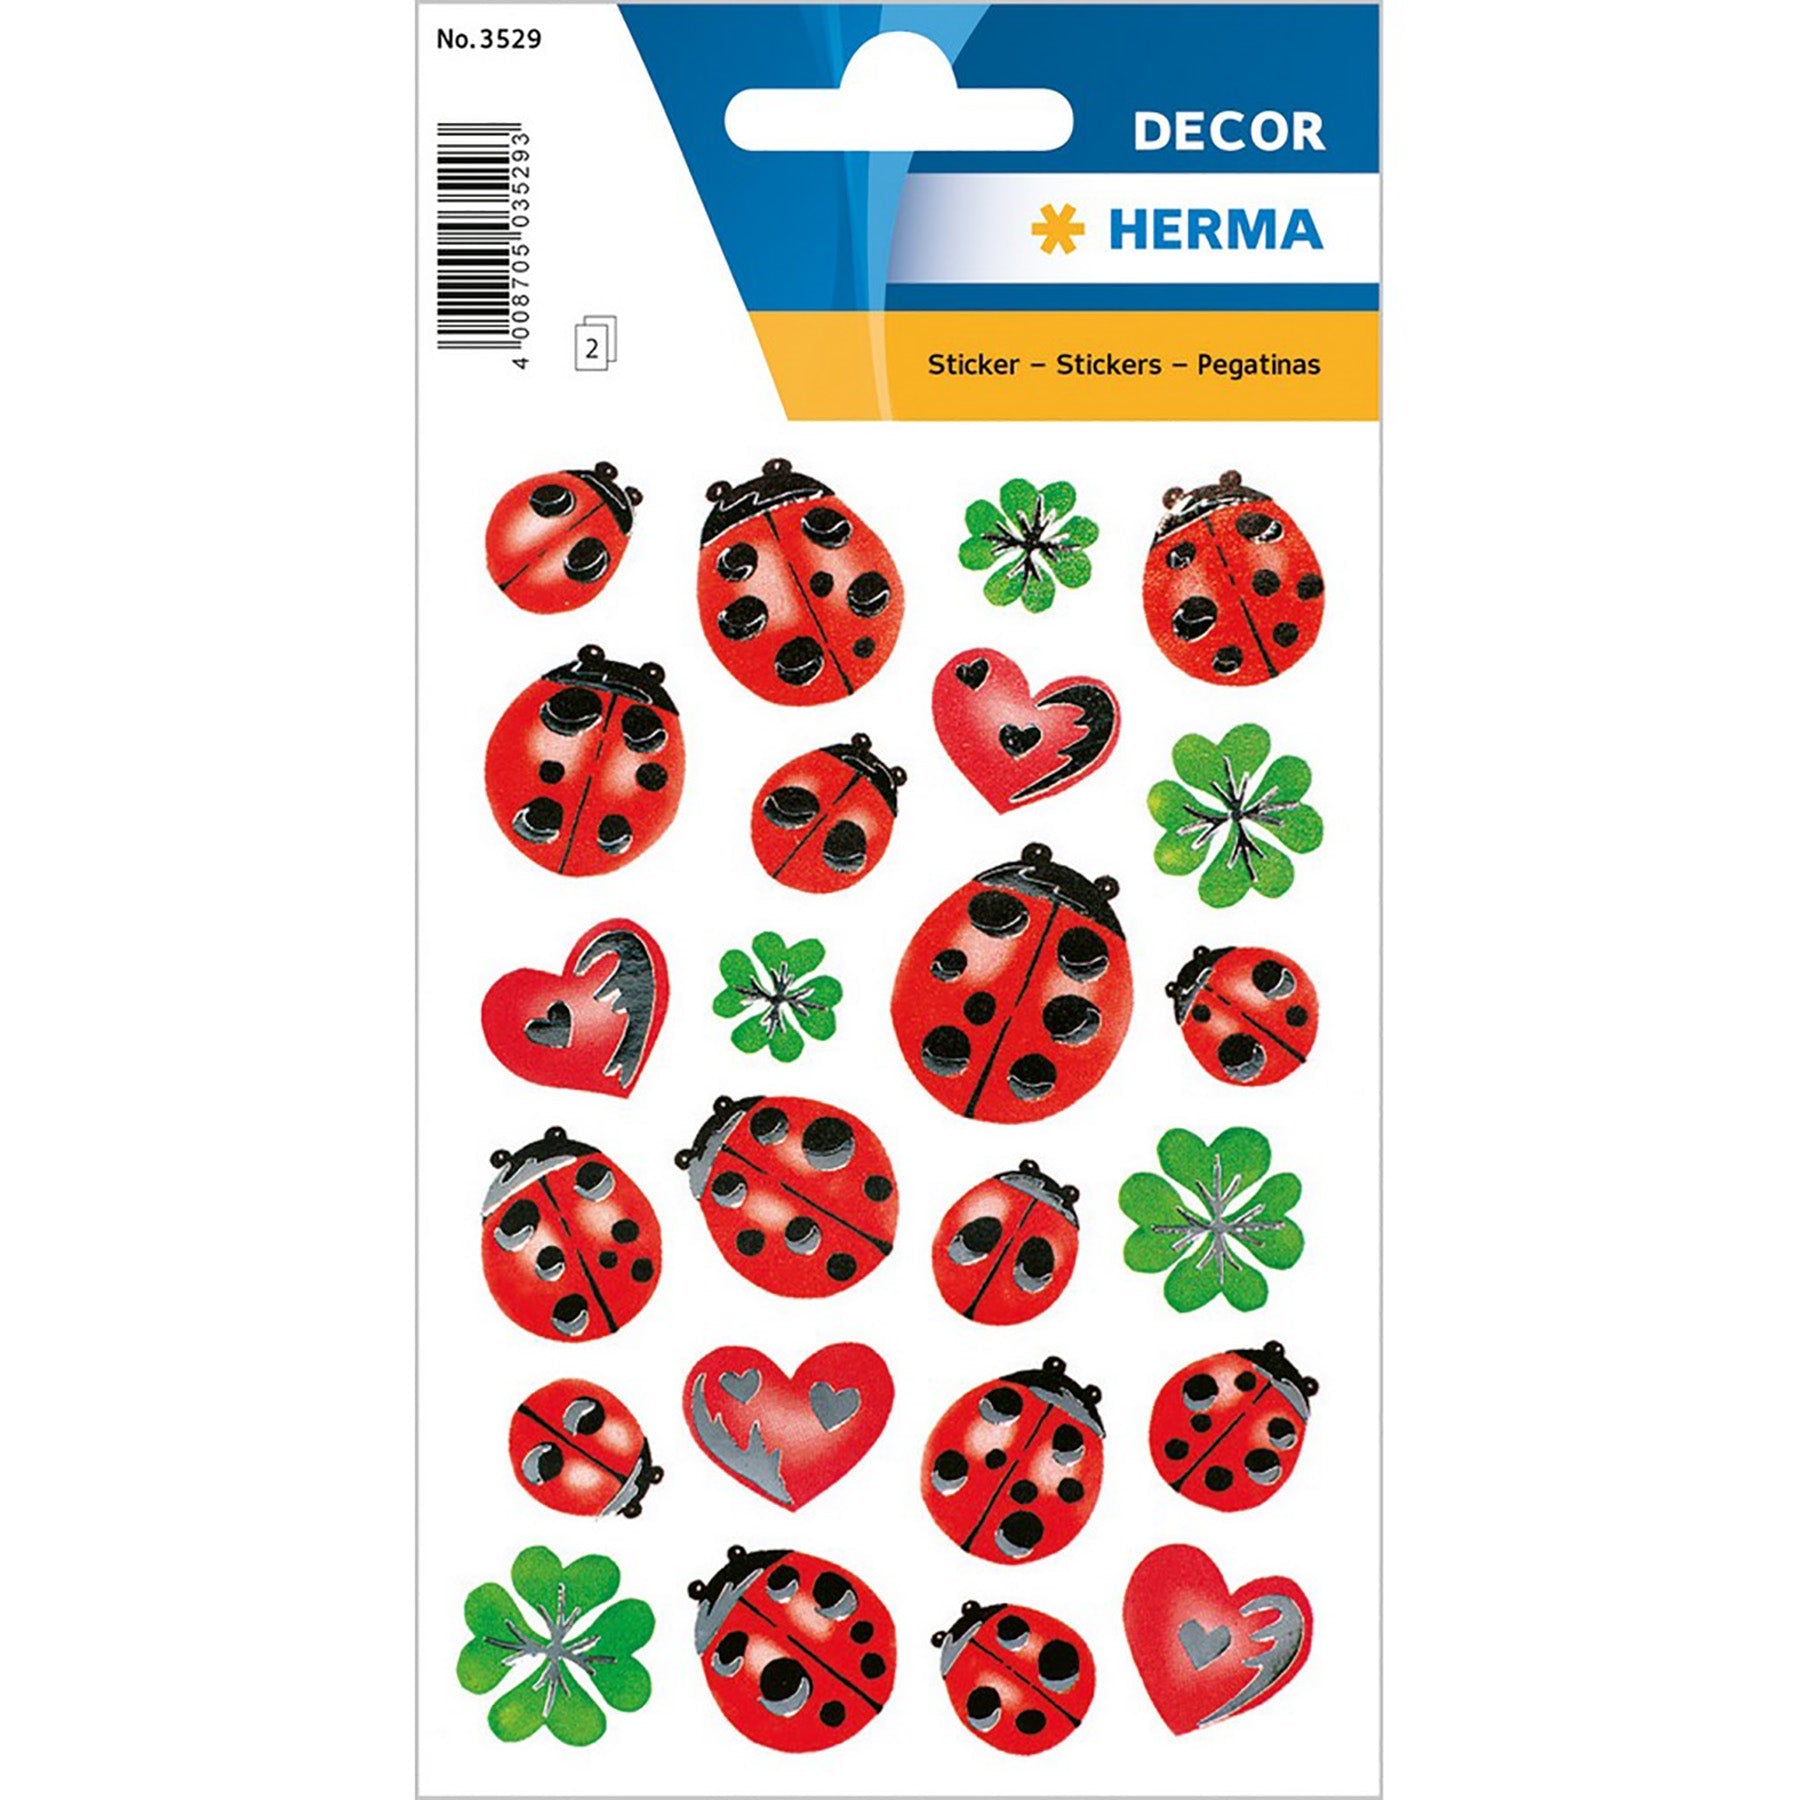 Herma Decor 2 Sheets Stickers Ladybugs Silver Embossed 4.75x3.1in Sheet